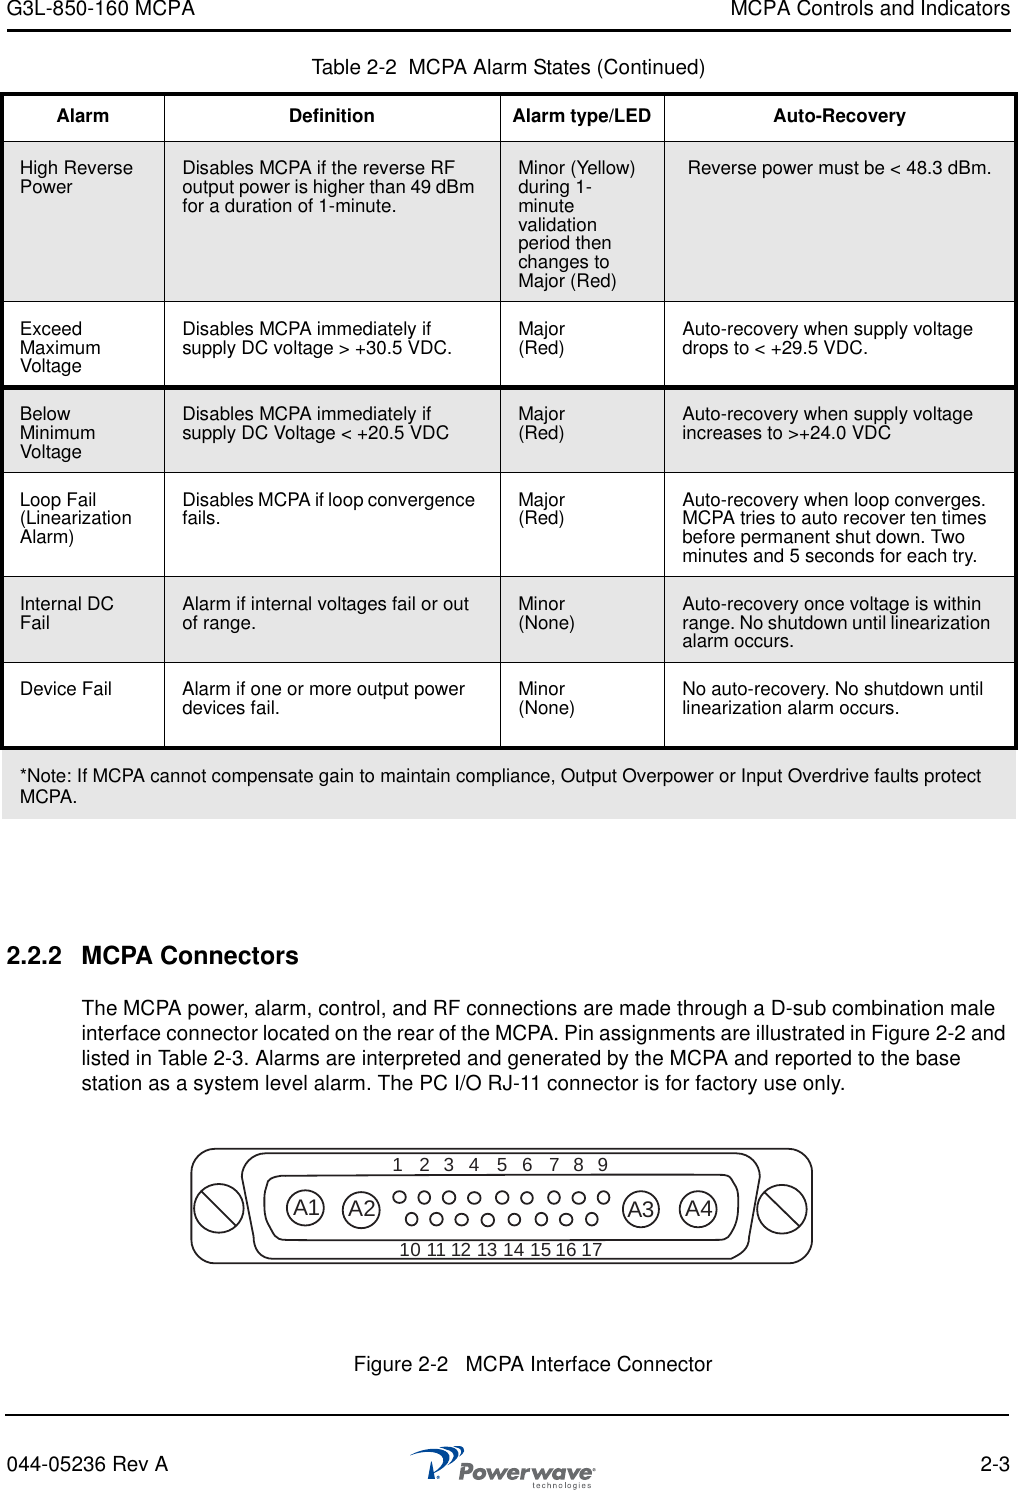 G3L-850-160 MCPA MCPA Controls and Indicators044-05236 Rev A 2-32.2.2 MCPA ConnectorsThe MCPA power, alarm, control, and RF connections are made through a D-sub combination male interface connector located on the rear of the MCPA. Pin assignments are illustrated in Figure 2-2 and listed in Table 2-3. Alarms are interpreted and generated by the MCPA and reported to the base station as a system level alarm. The PC I/O RJ-11 connector is for factory use only.High Reverse Power Disables MCPA if the reverse RF output power is higher than 49 dBm for a duration of 1-minute.Minor (Yellow) during 1-minute validation period then changes to Major (Red) Reverse power must be &lt; 48.3 dBm.Exceed Maximum VoltageDisables MCPA immediately if supply DC voltage &gt; +30.5 VDC. Major(Red) Auto-recovery when supply voltage drops to &lt; +29.5 VDC.Below Minimum VoltageDisables MCPA immediately if supply DC Voltage &lt; +20.5 VDC Major(Red) Auto-recovery when supply voltage increases to &gt;+24.0 VDCLoop Fail (Linearization Alarm)Disables MCPA if loop convergence fails. Major(Red) Auto-recovery when loop converges. MCPA tries to auto recover ten times before permanent shut down. Two minutes and 5 seconds for each try.Internal DC Fail Alarm if internal voltages fail or out of range. Minor(None) Auto-recovery once voltage is within range. No shutdown until linearization alarm occurs.Device Fail Alarm if one or more output power devices fail. Minor(None) No auto-recovery. No shutdown until linearization alarm occurs.*Note: If MCPA cannot compensate gain to maintain compliance, Output Overpower or Input Overdrive faults protect MCPA.Table 2-2  MCPA Alarm States (Continued)Alarm Definition Alarm type/LED Auto-Recovery123A1 A2 A3 A445678910 11 12 13 14 15 16 17Figure 2-2   MCPA Interface Connector